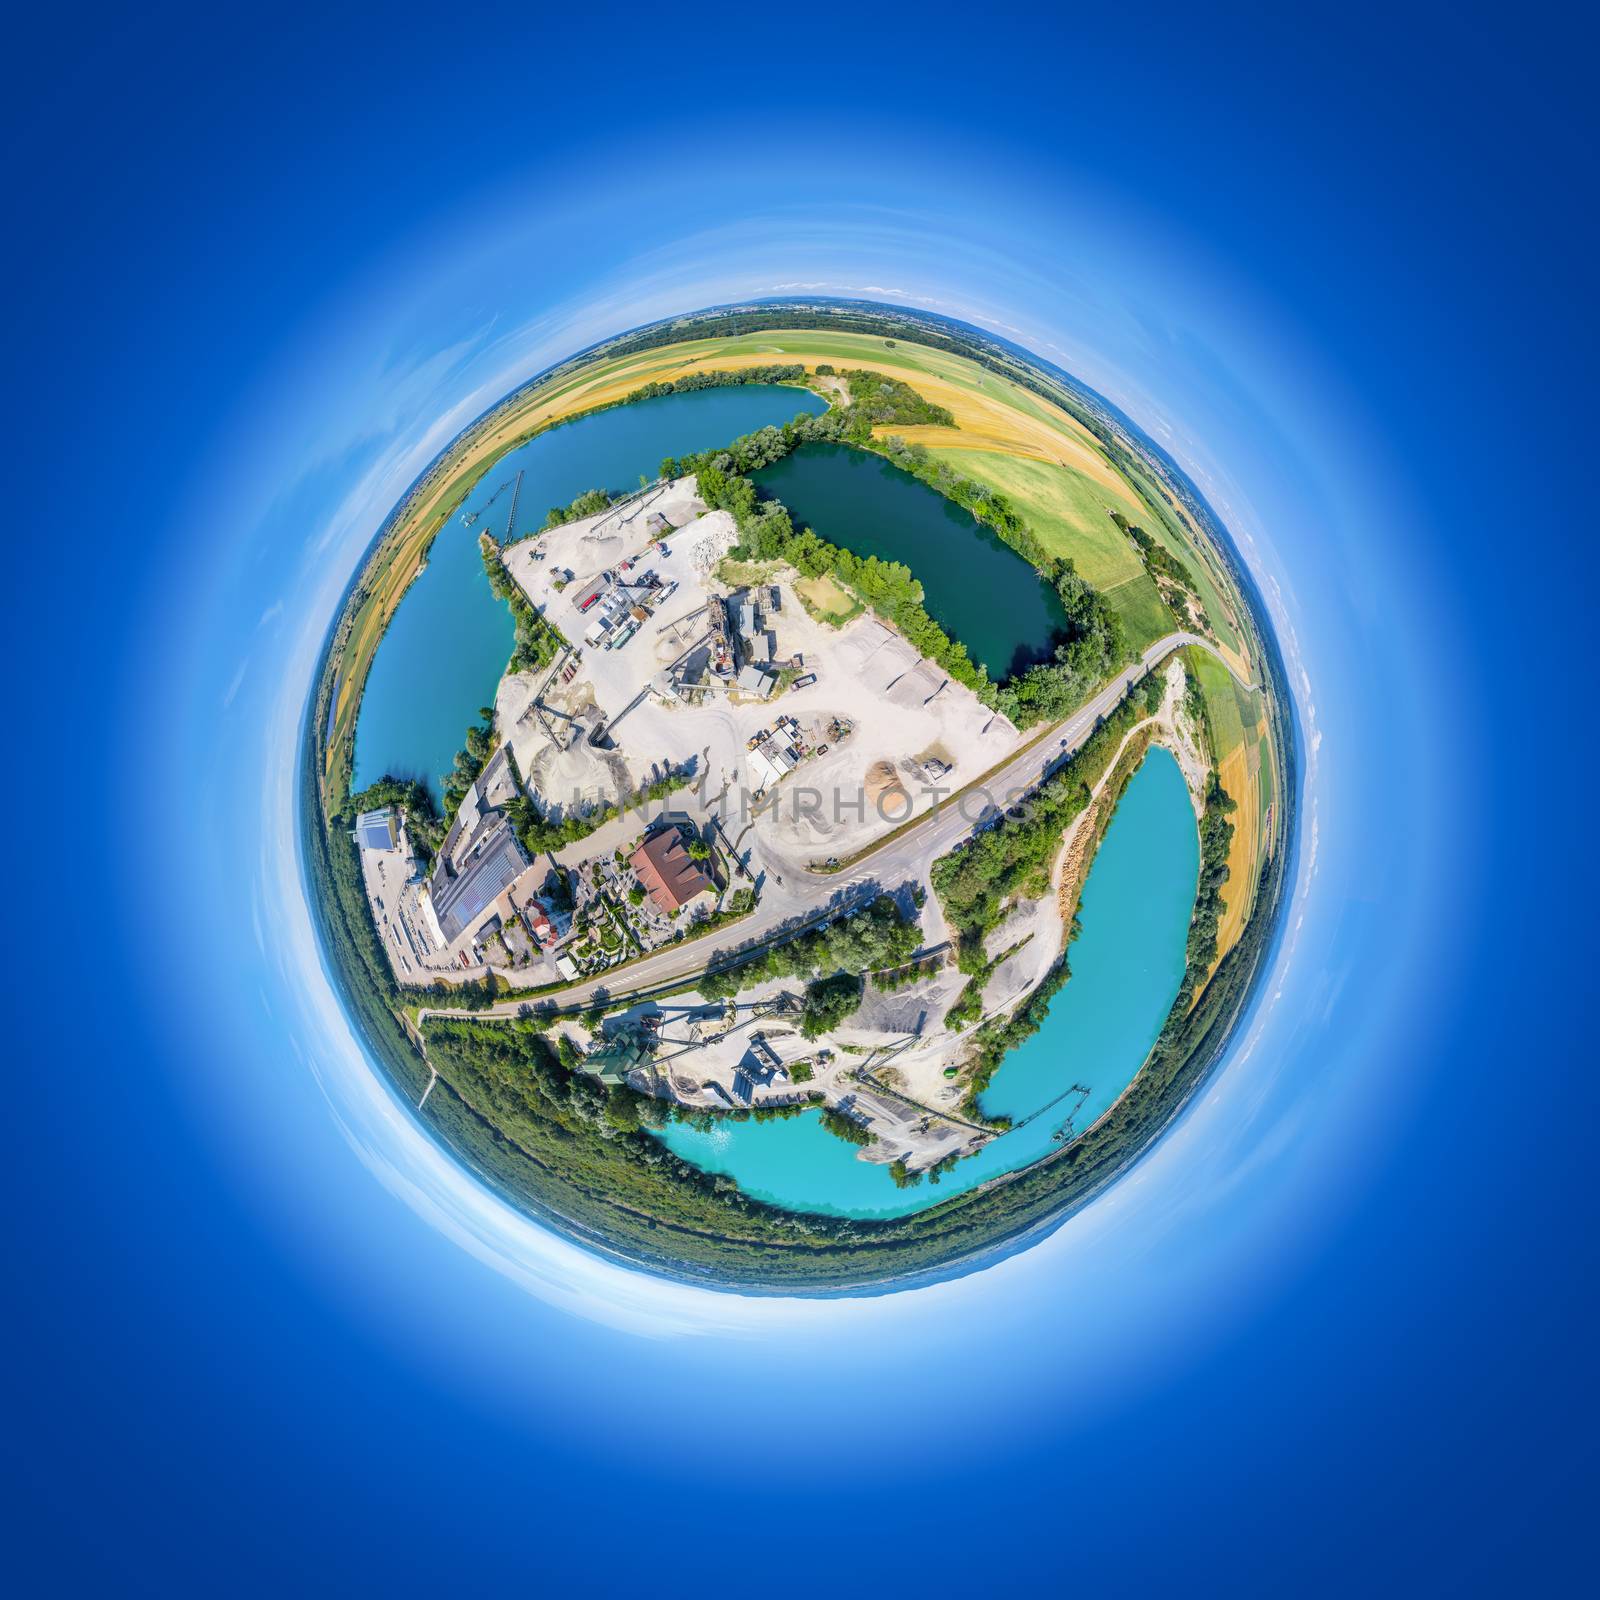 little planet of lakes at the Rhine valley south Germany by magann